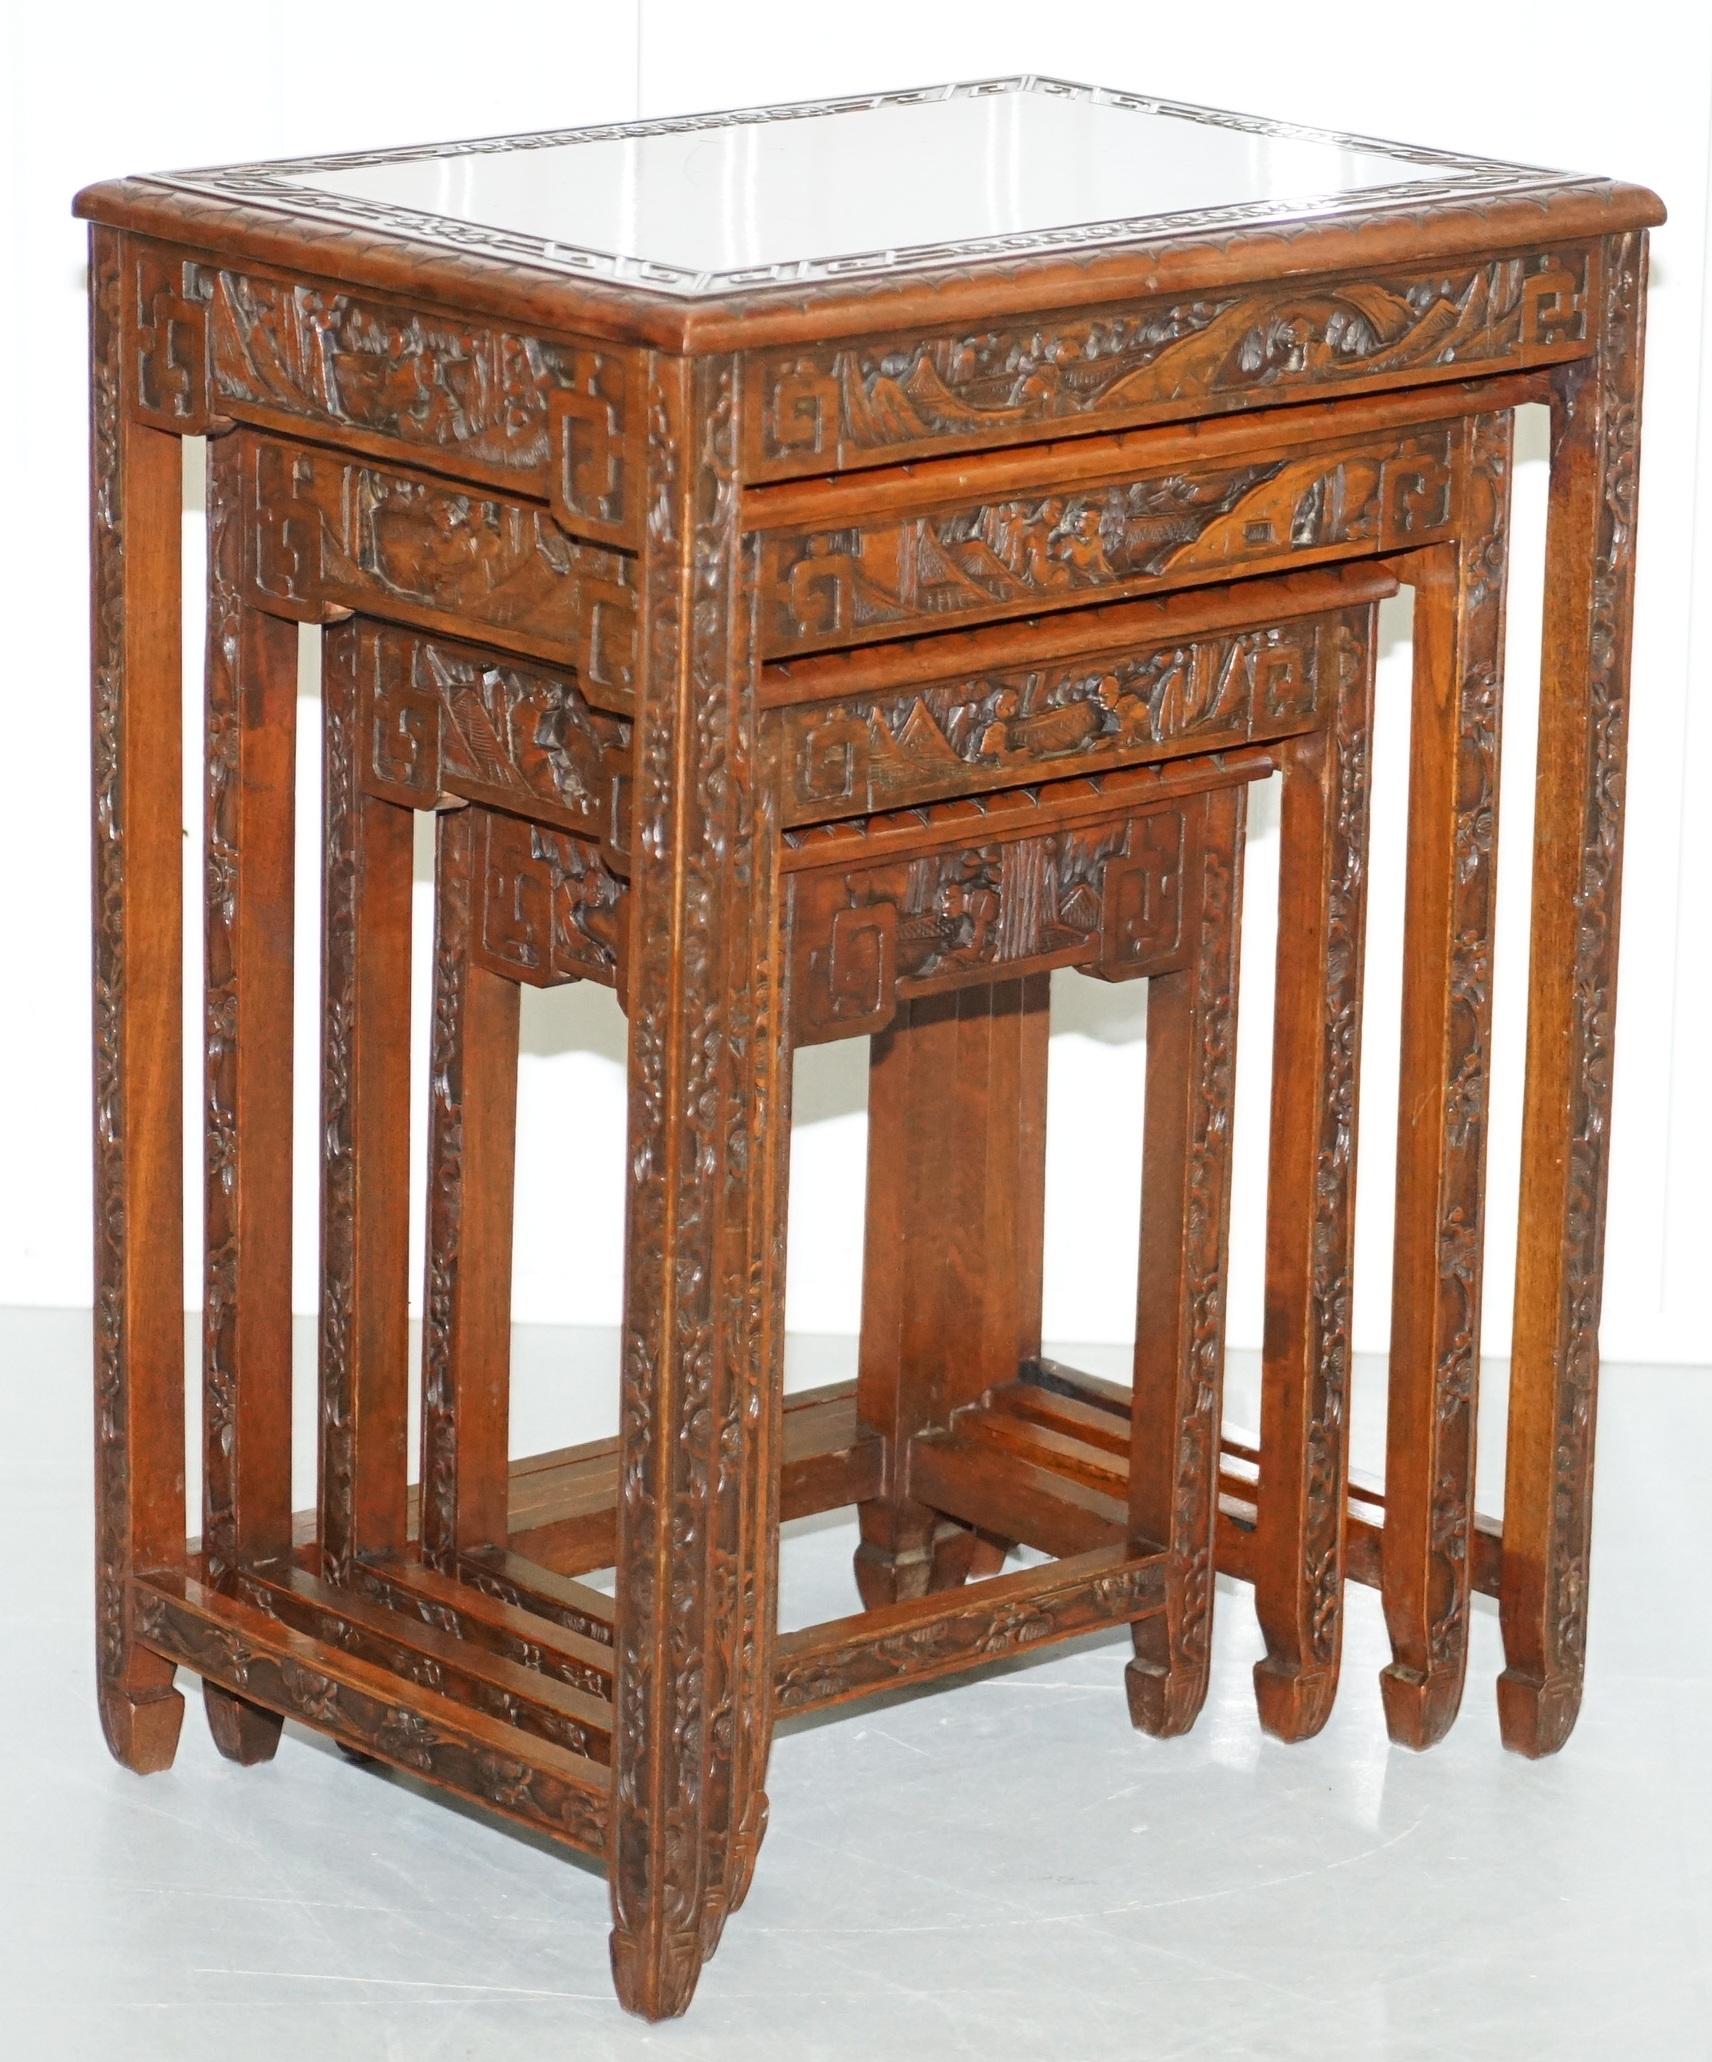 We are delighted to offer for sale this lovely set of circa 1930s solid teak Chinese Export nested tables all heavily carved.

A very good looking suite, its rare to find them with four tables, often its only three. These are heavily carved with